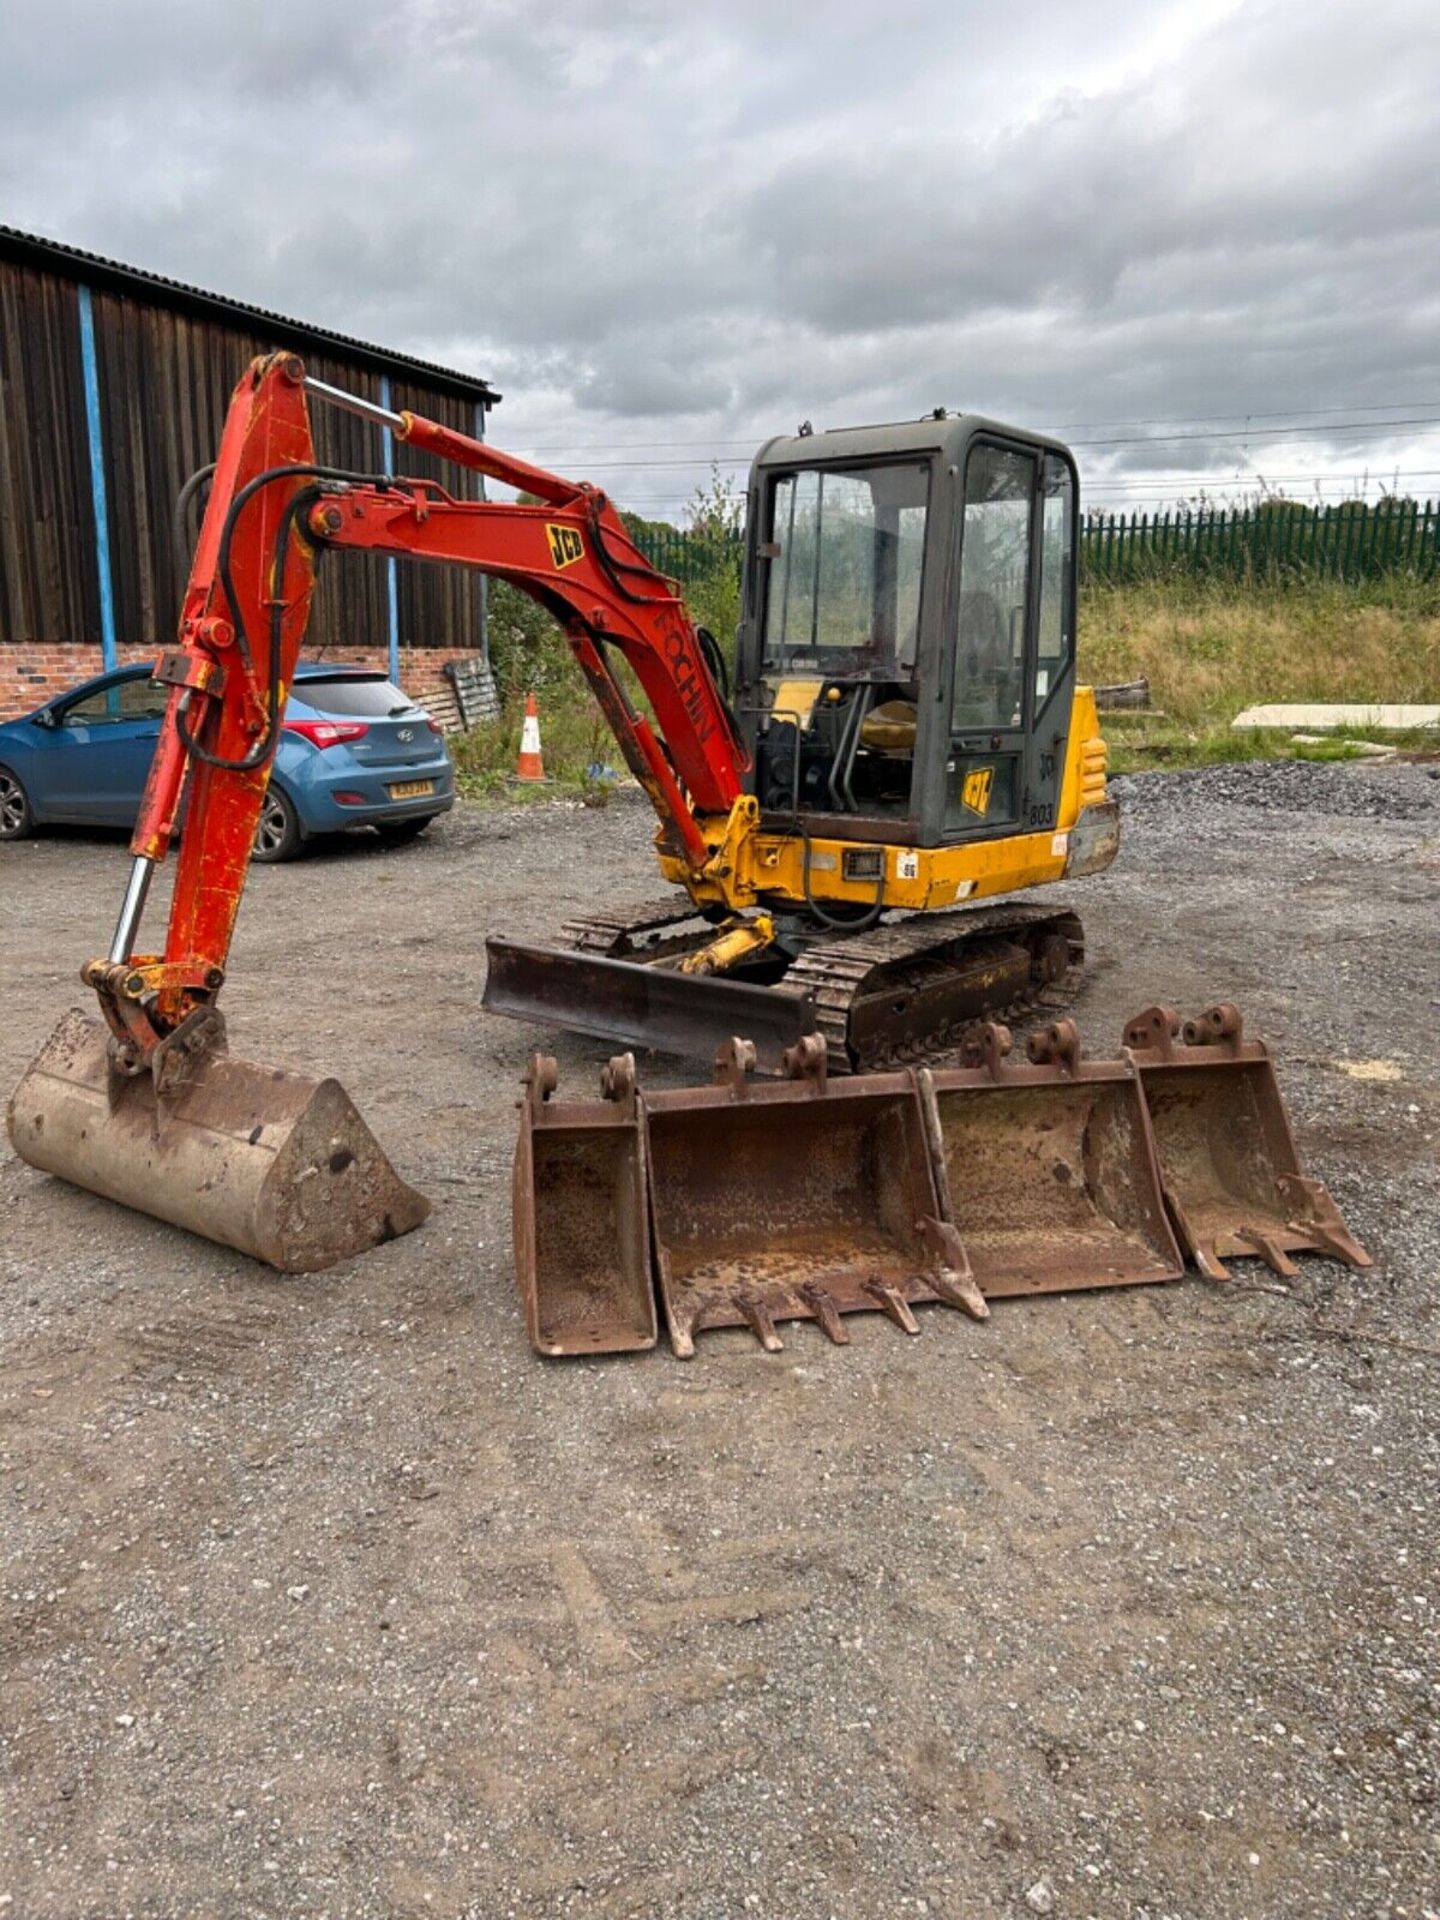 SOLID TRACKS, STRONG DIGGER: 1994 JCB 803 WITH PERKINS ENGINE - Image 9 of 14